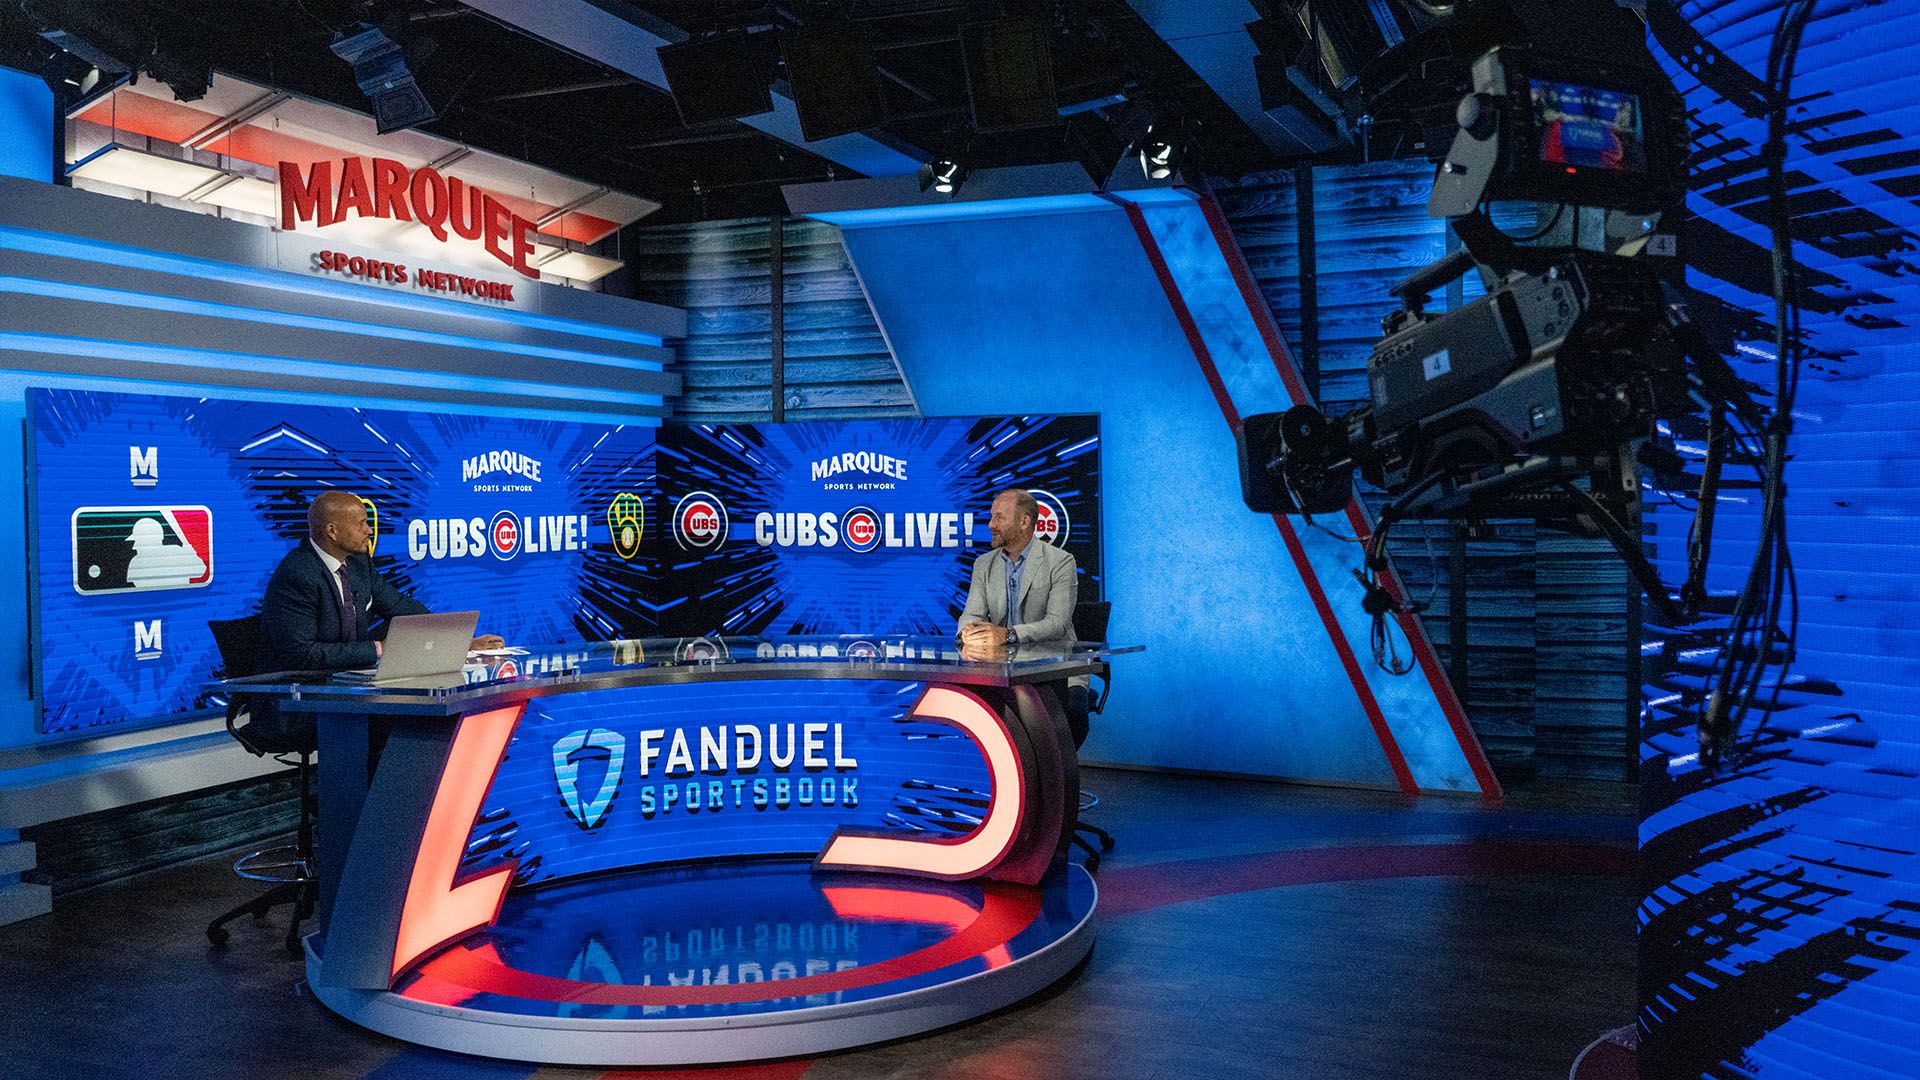 Marquee Sports Network Studio Experience, experience